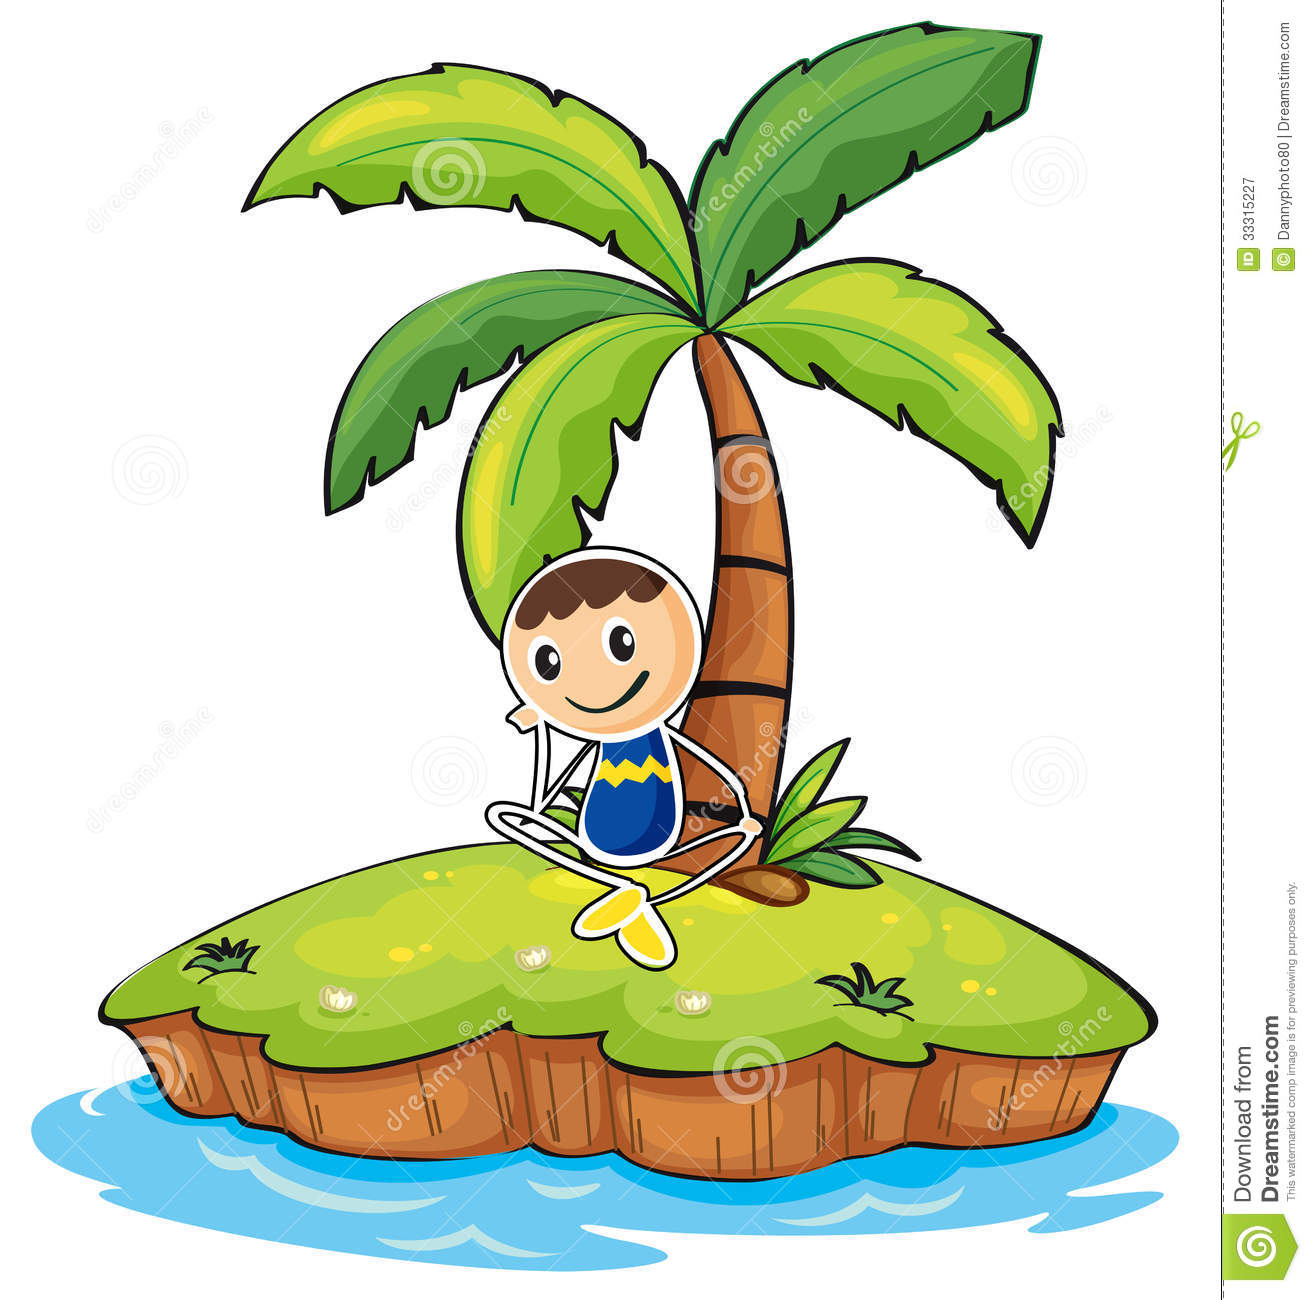 Boy Sitting Under The Coconut Tree Royalty Free Stock Photography